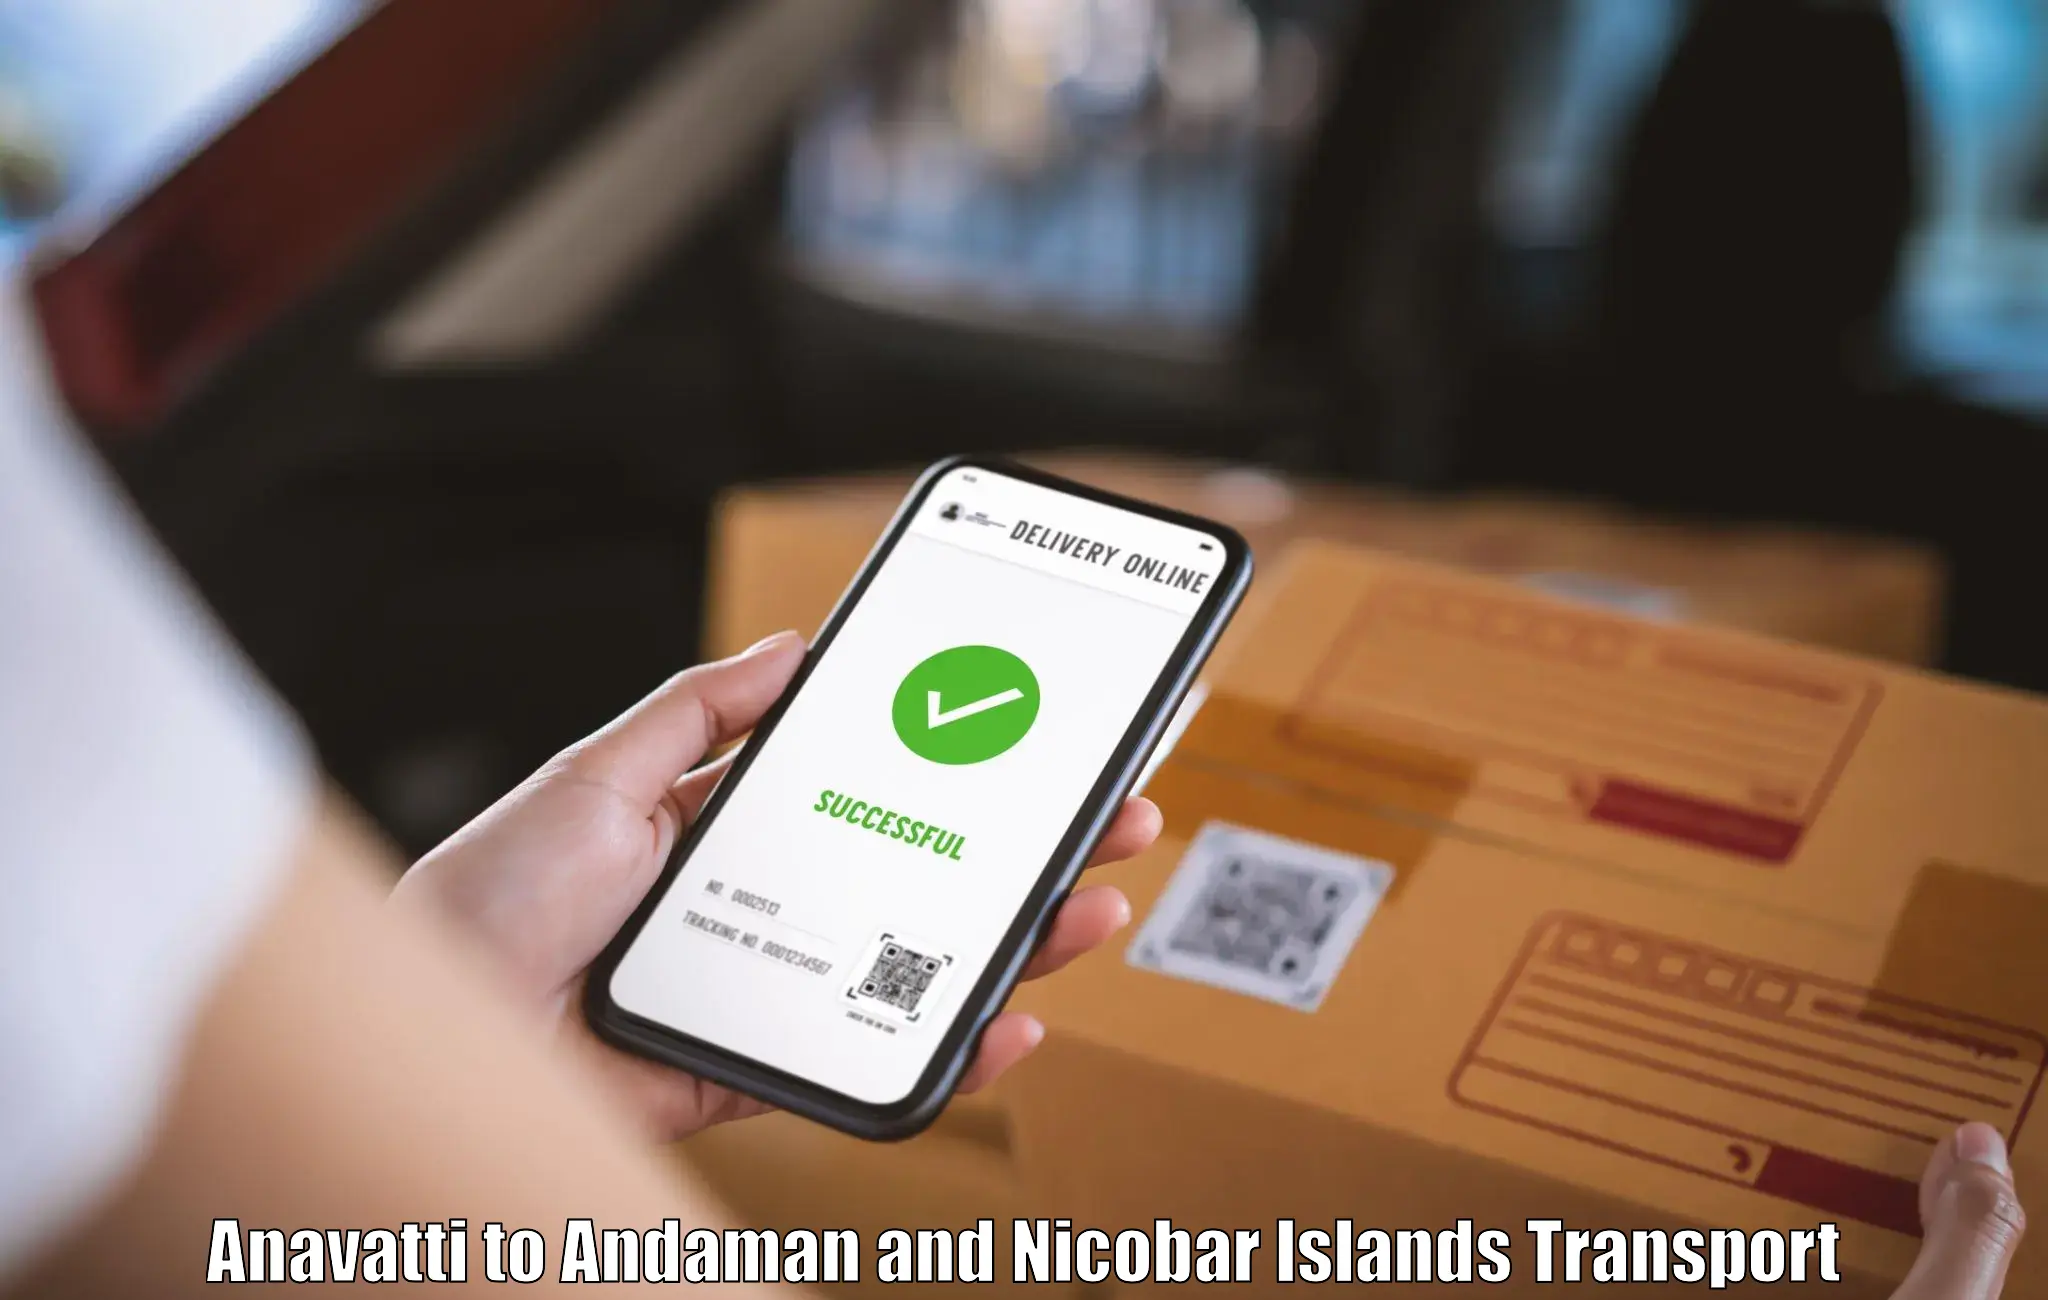 Nationwide transport services Anavatti to South Andaman